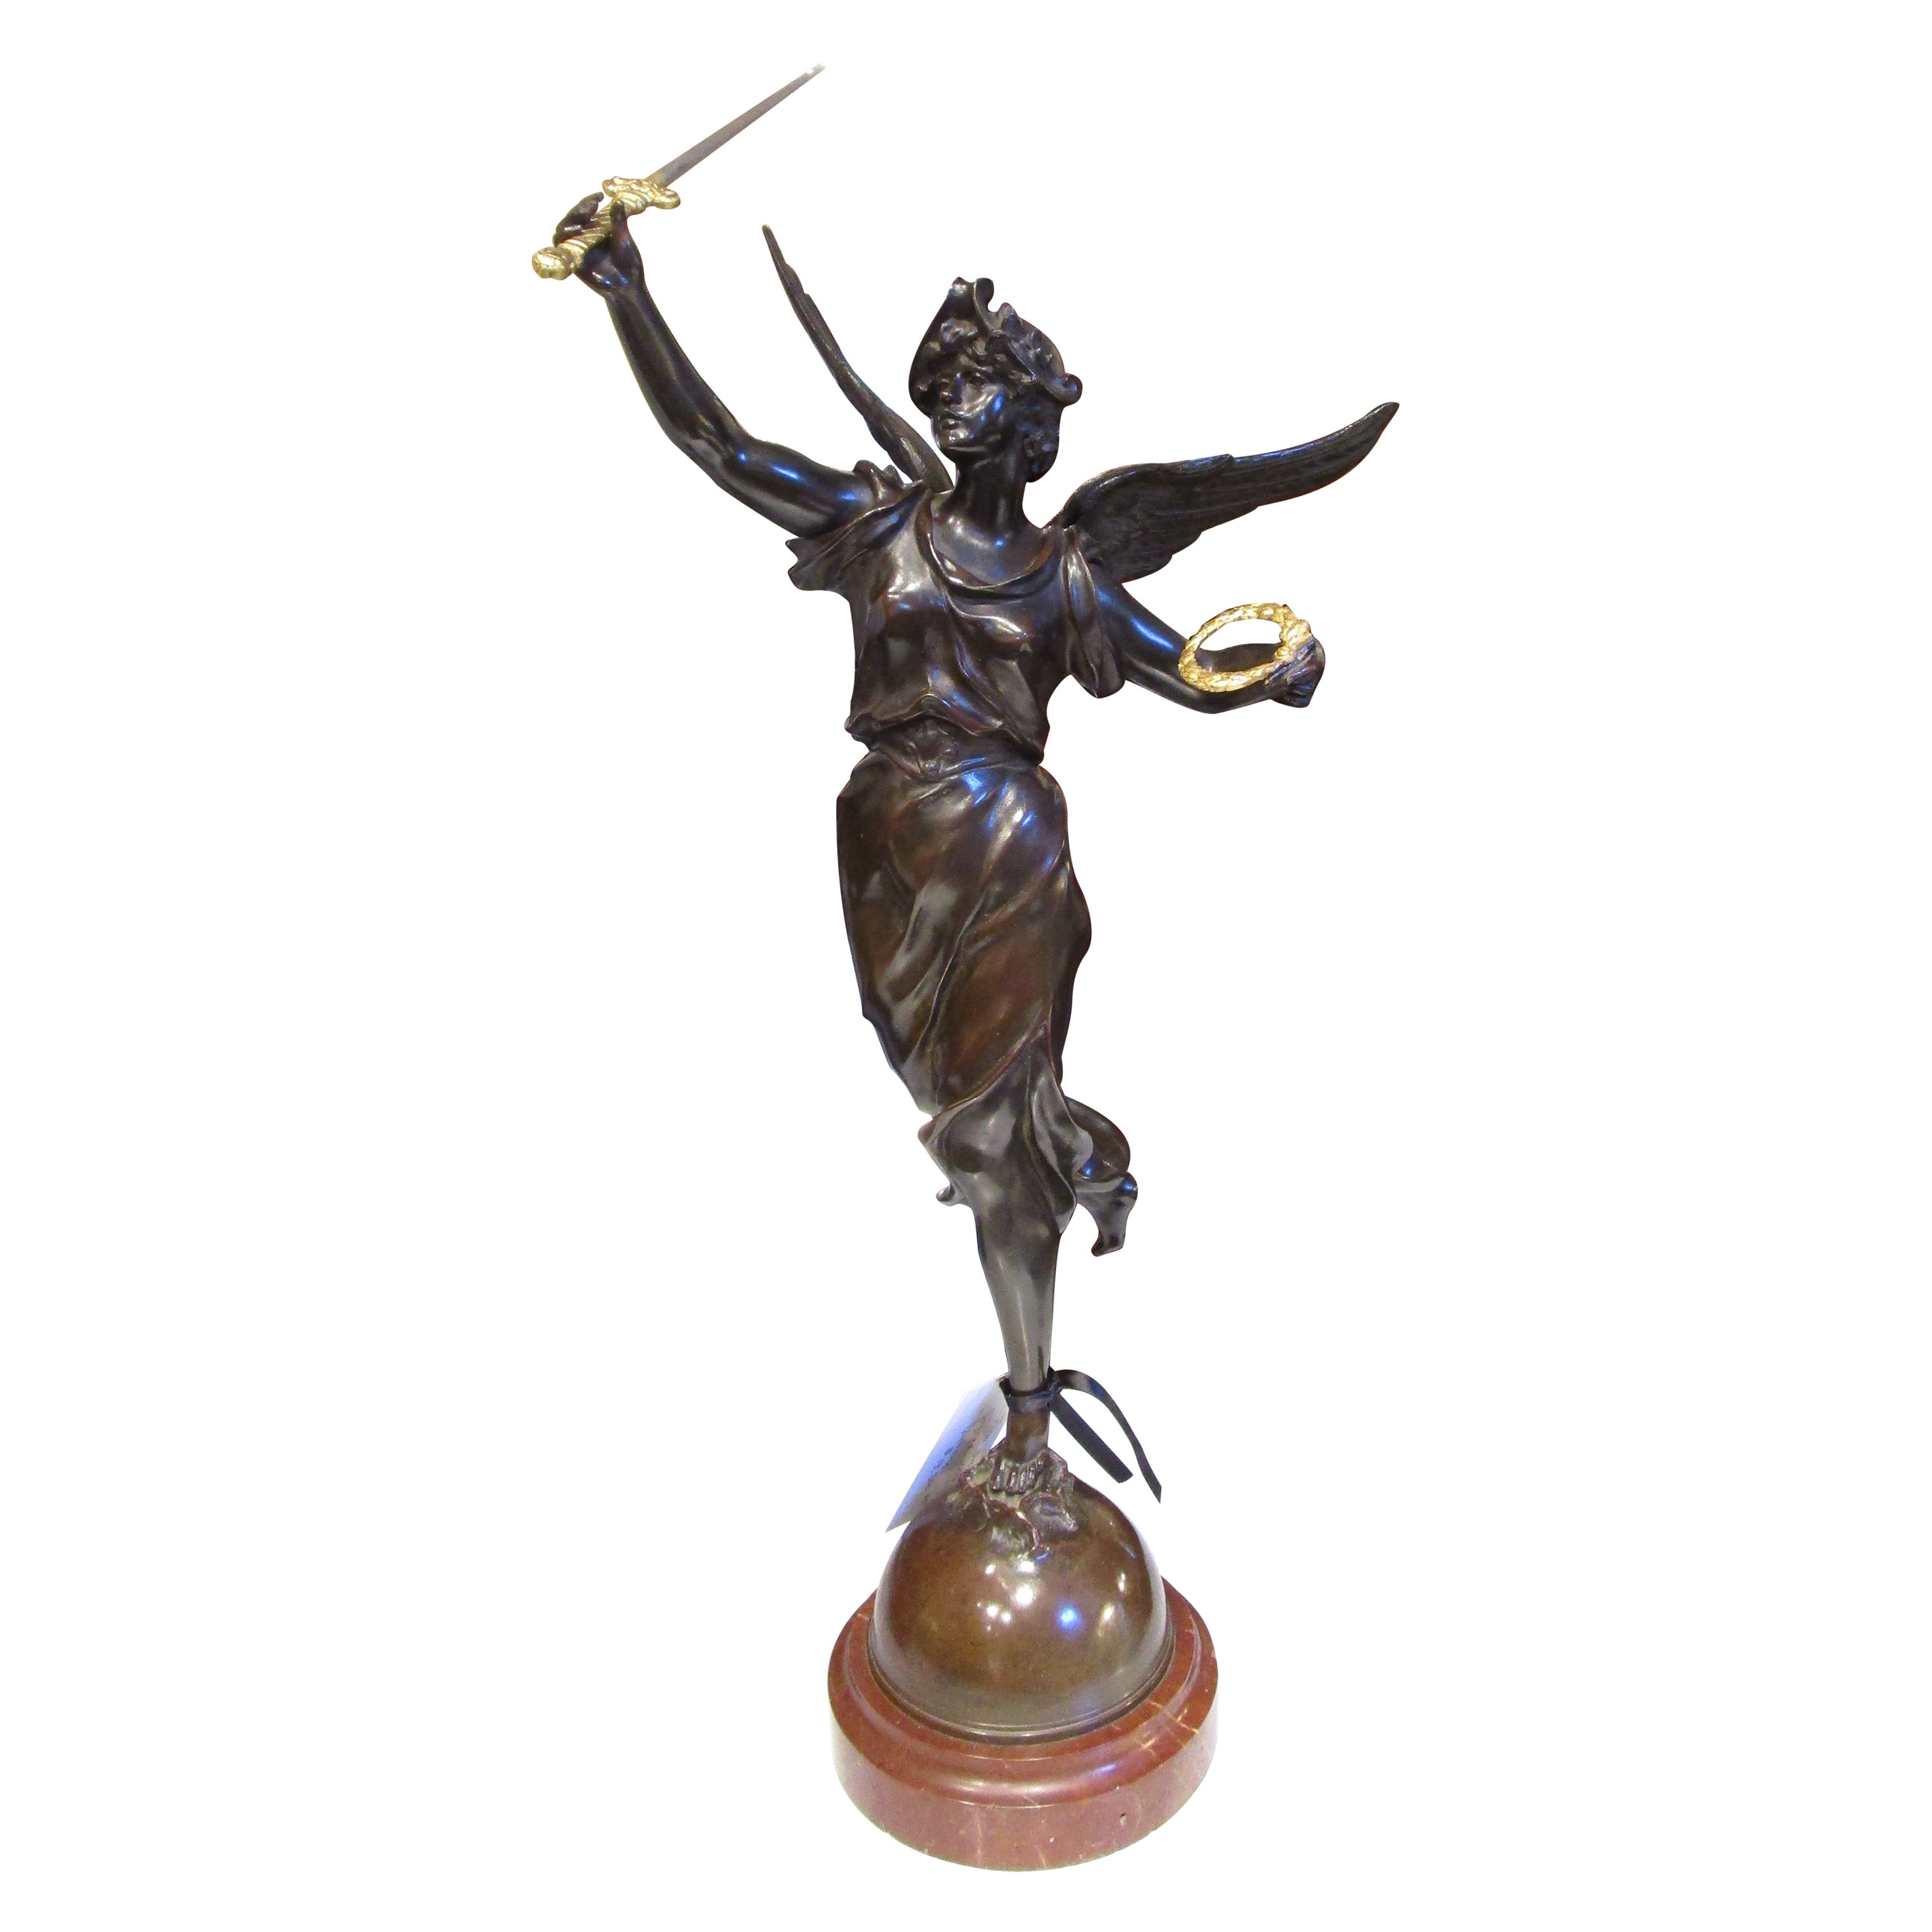 A fine 19th century French signed bronze of Victory. Parcel gilt details .